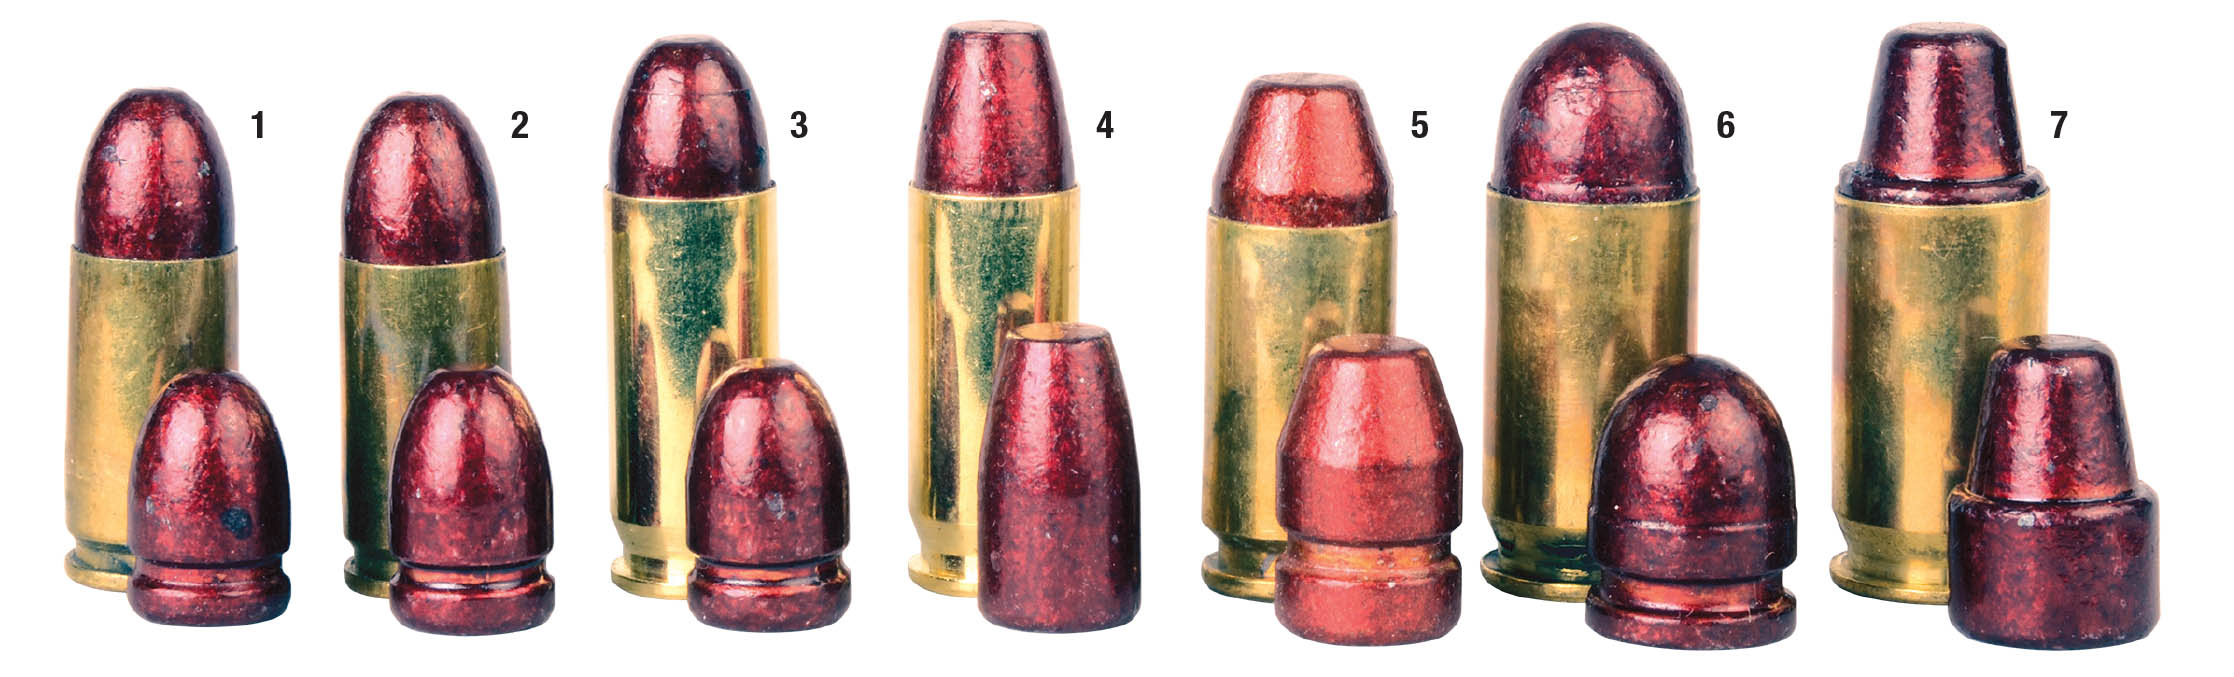 Mike used four semiautomatic pistol cartridges with a total of seven Missouri Bullet Company coated bullets including, the (1) 9mm 115-grain RN, (2) 9mm 124 RN, (3) .38 Super 124 RN, (4) .38 Super 147 Tapered FP, (5) .40 S&W 180 Tapered FP, (6) .45 Auto 200 RN and a (7) .45 Auto 200 SWC.